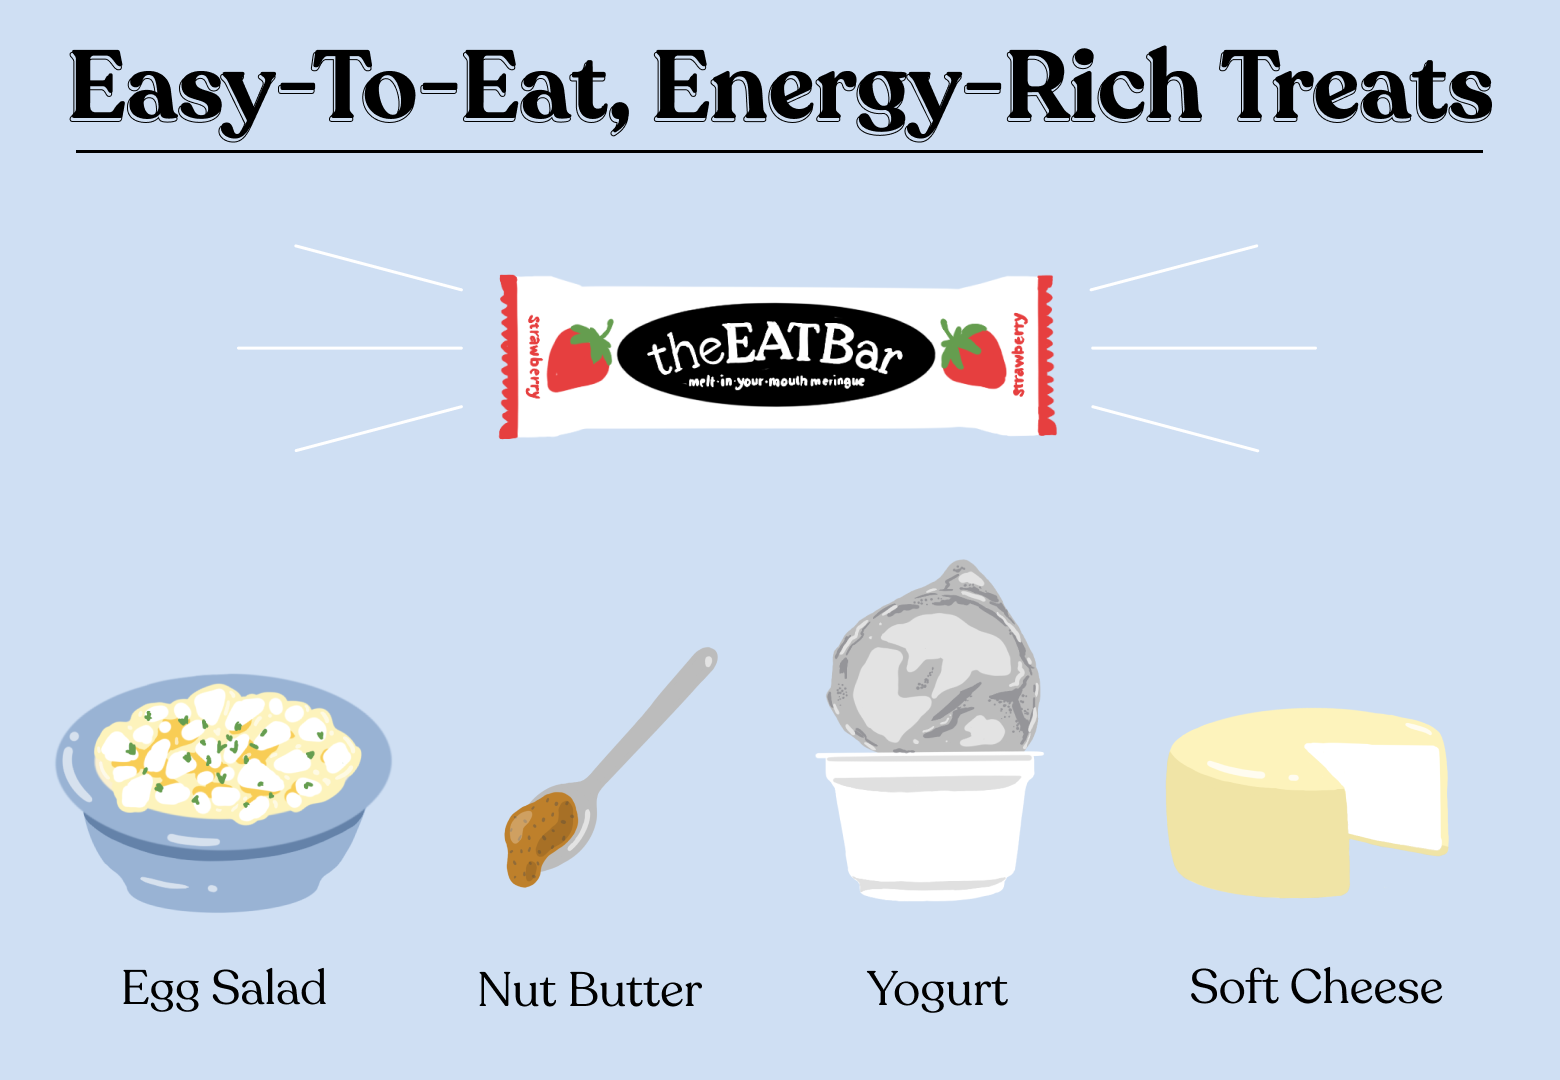 Easy to eat, energy-rich treats